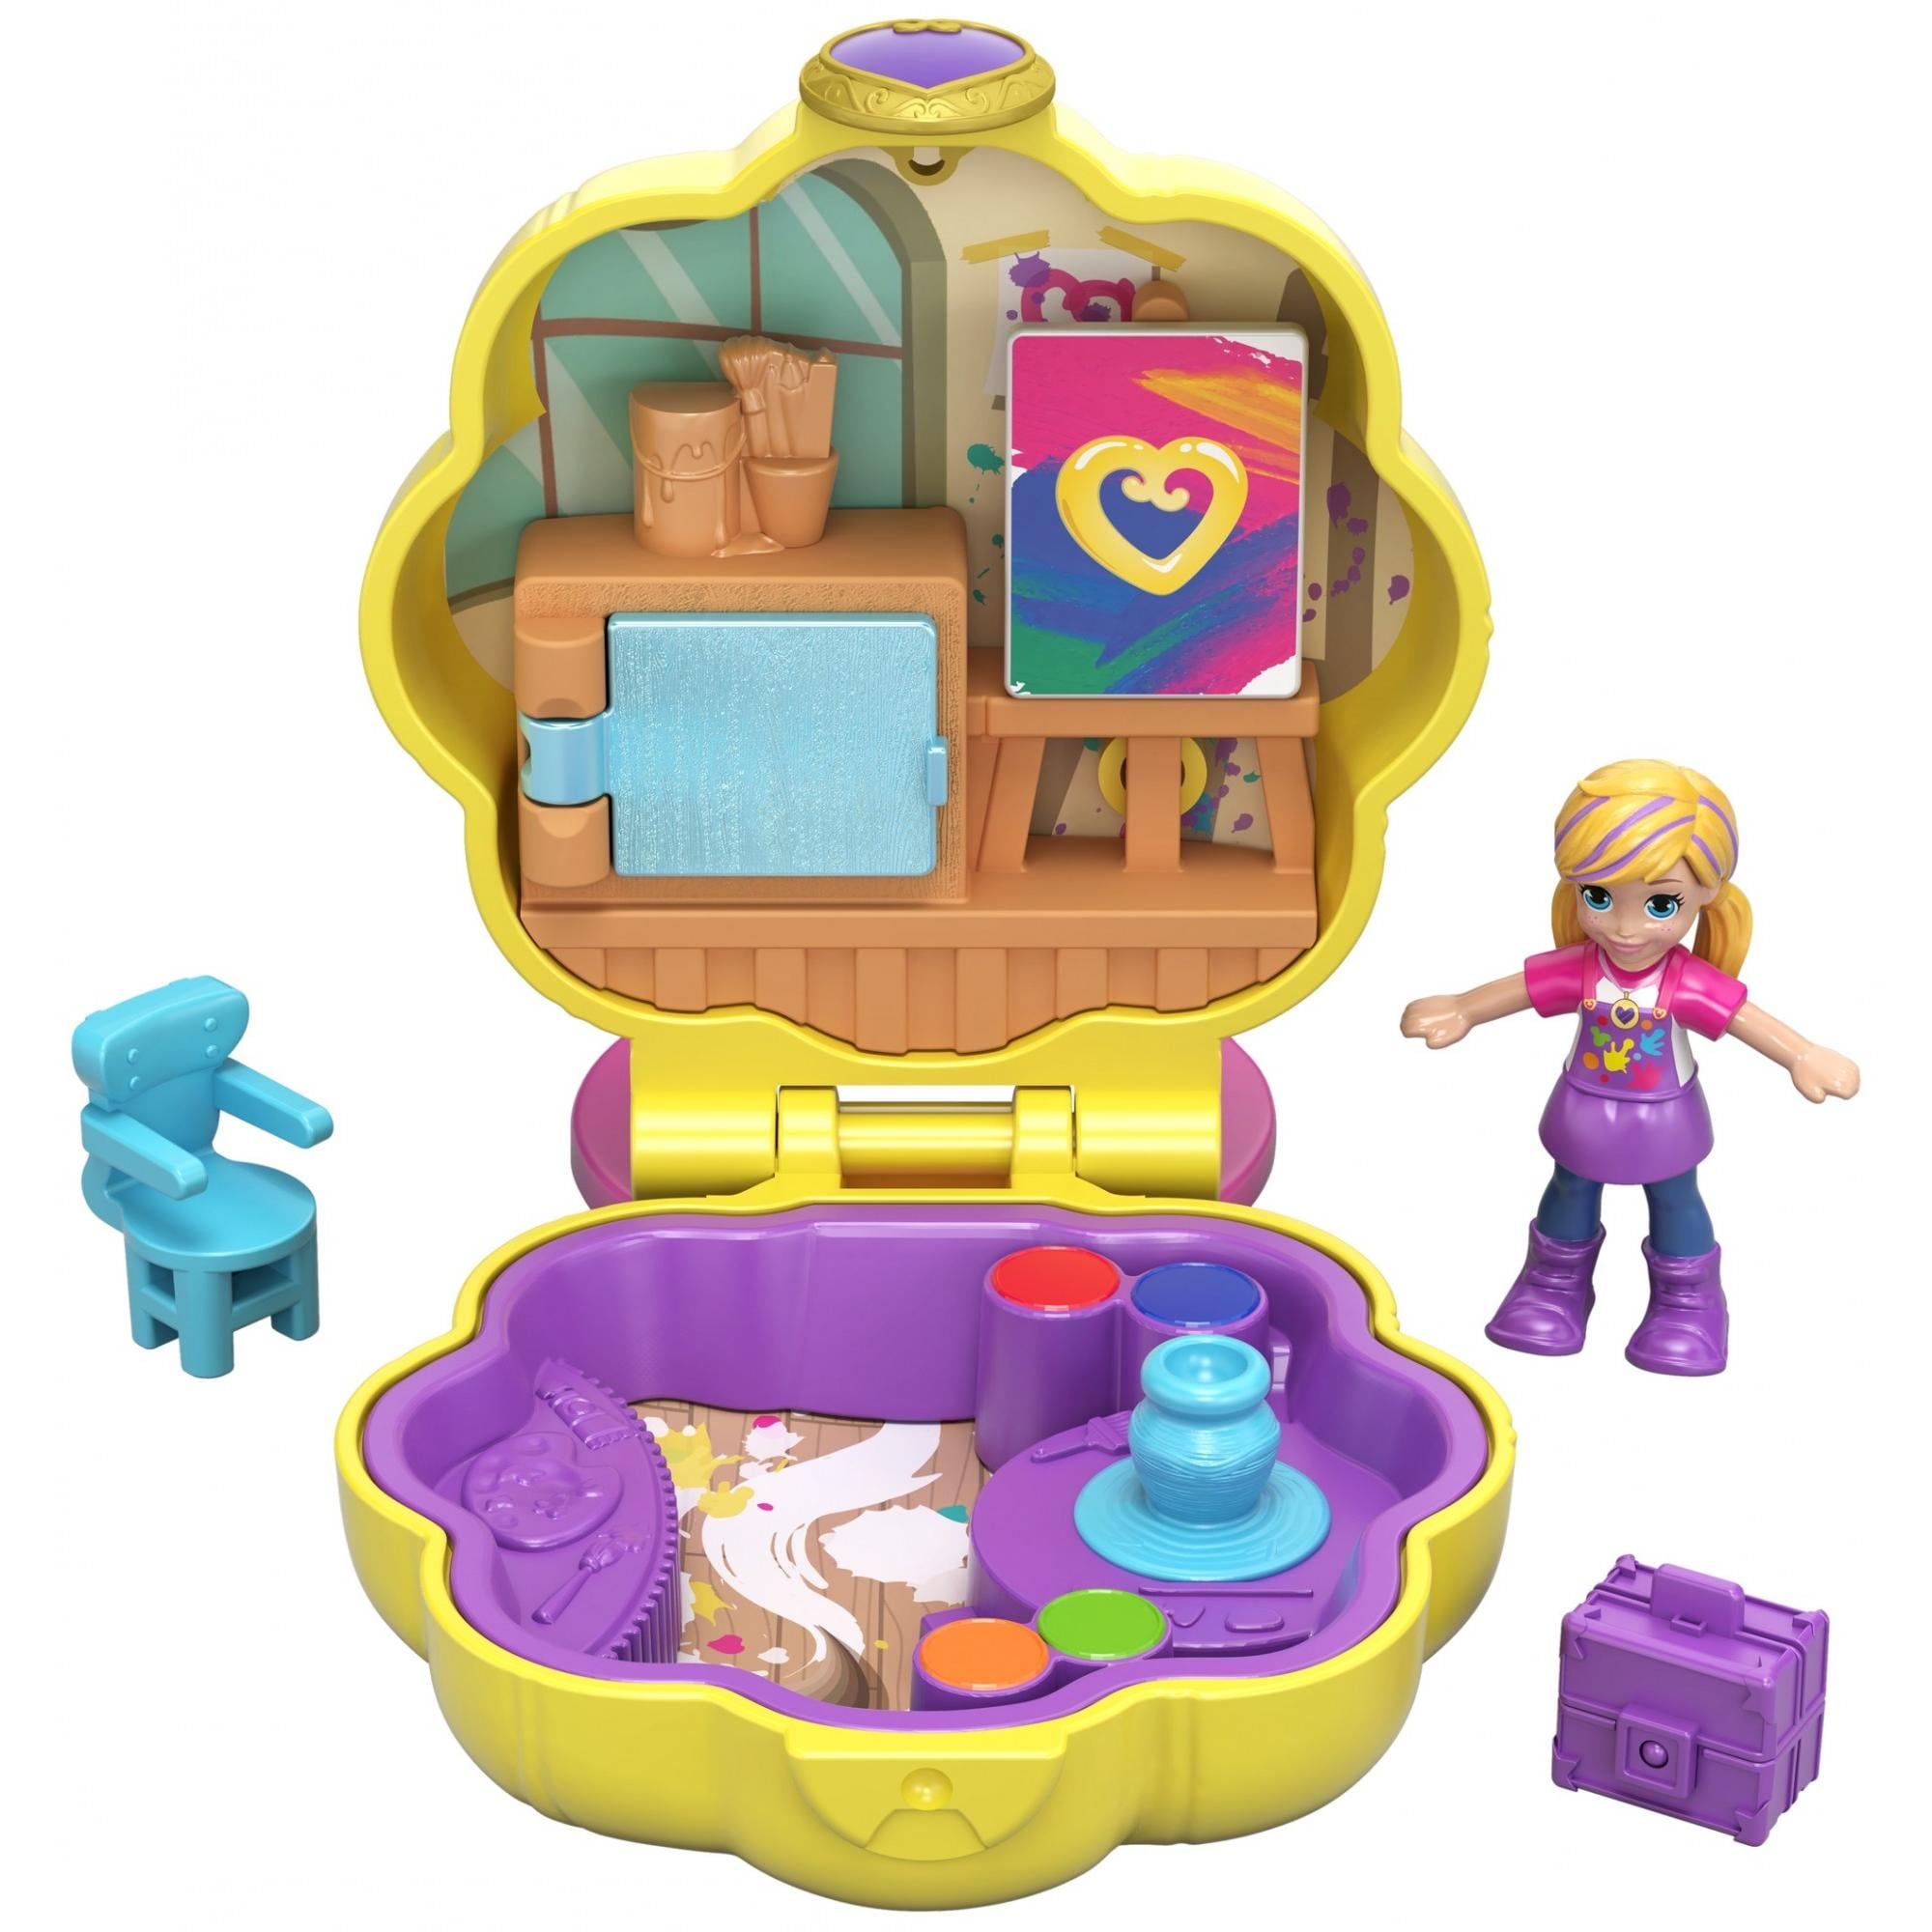 Polly Pocket Tiny Places Studio Concert Compact With Micro Shani doll Accessory 